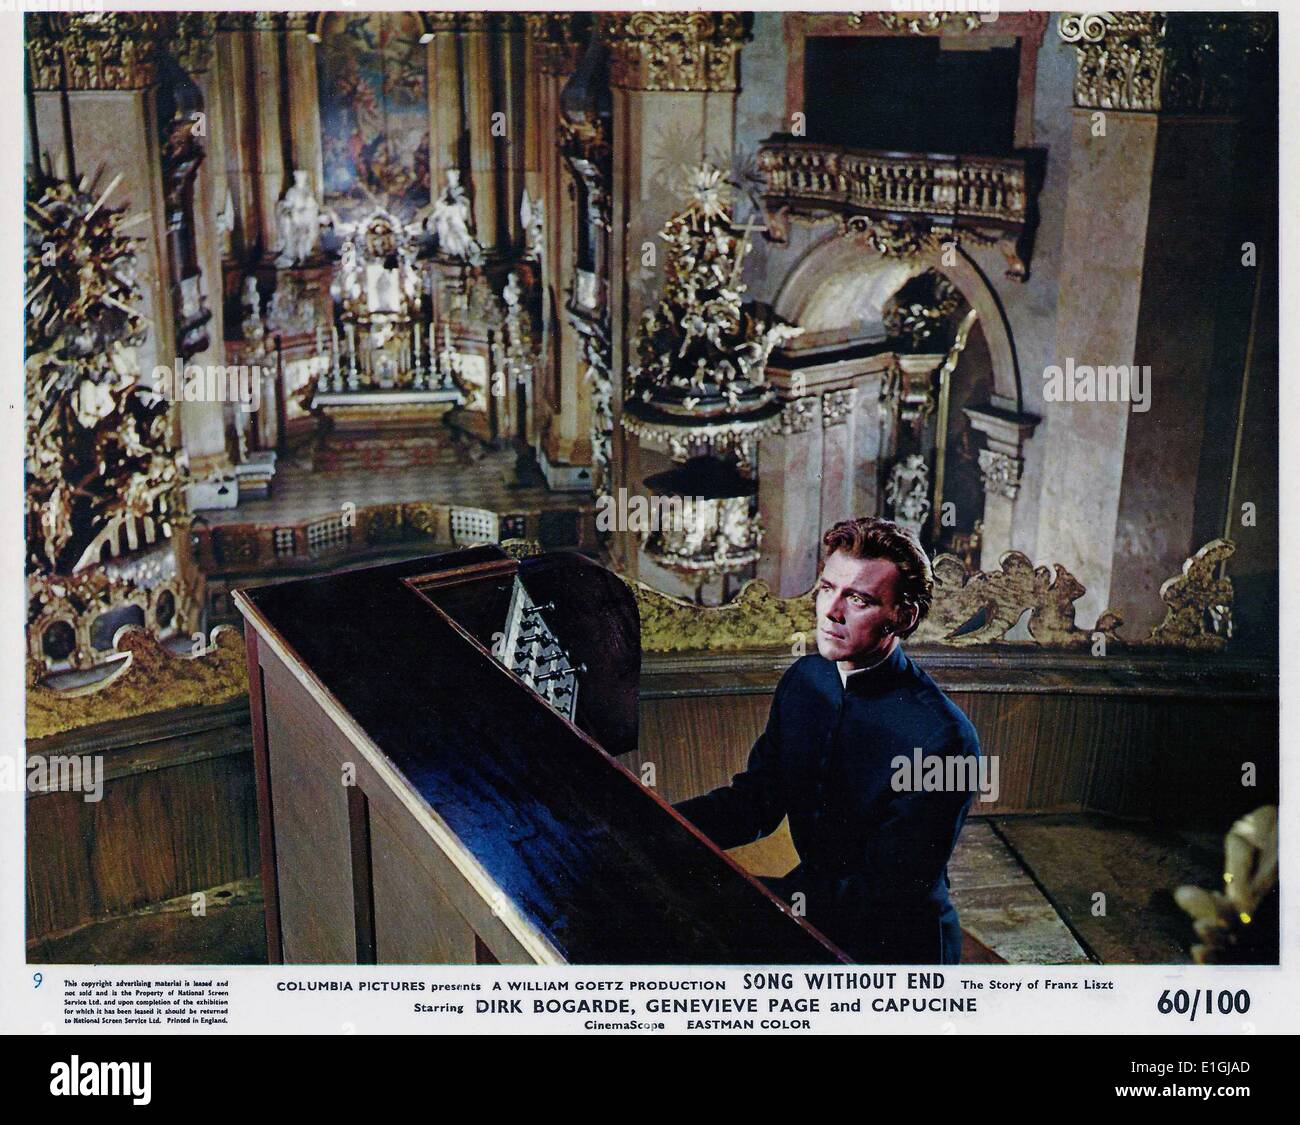 Song Without End a 1960 biographical film starring Dirk Bogarde as Franz Liszt. Stock Photo